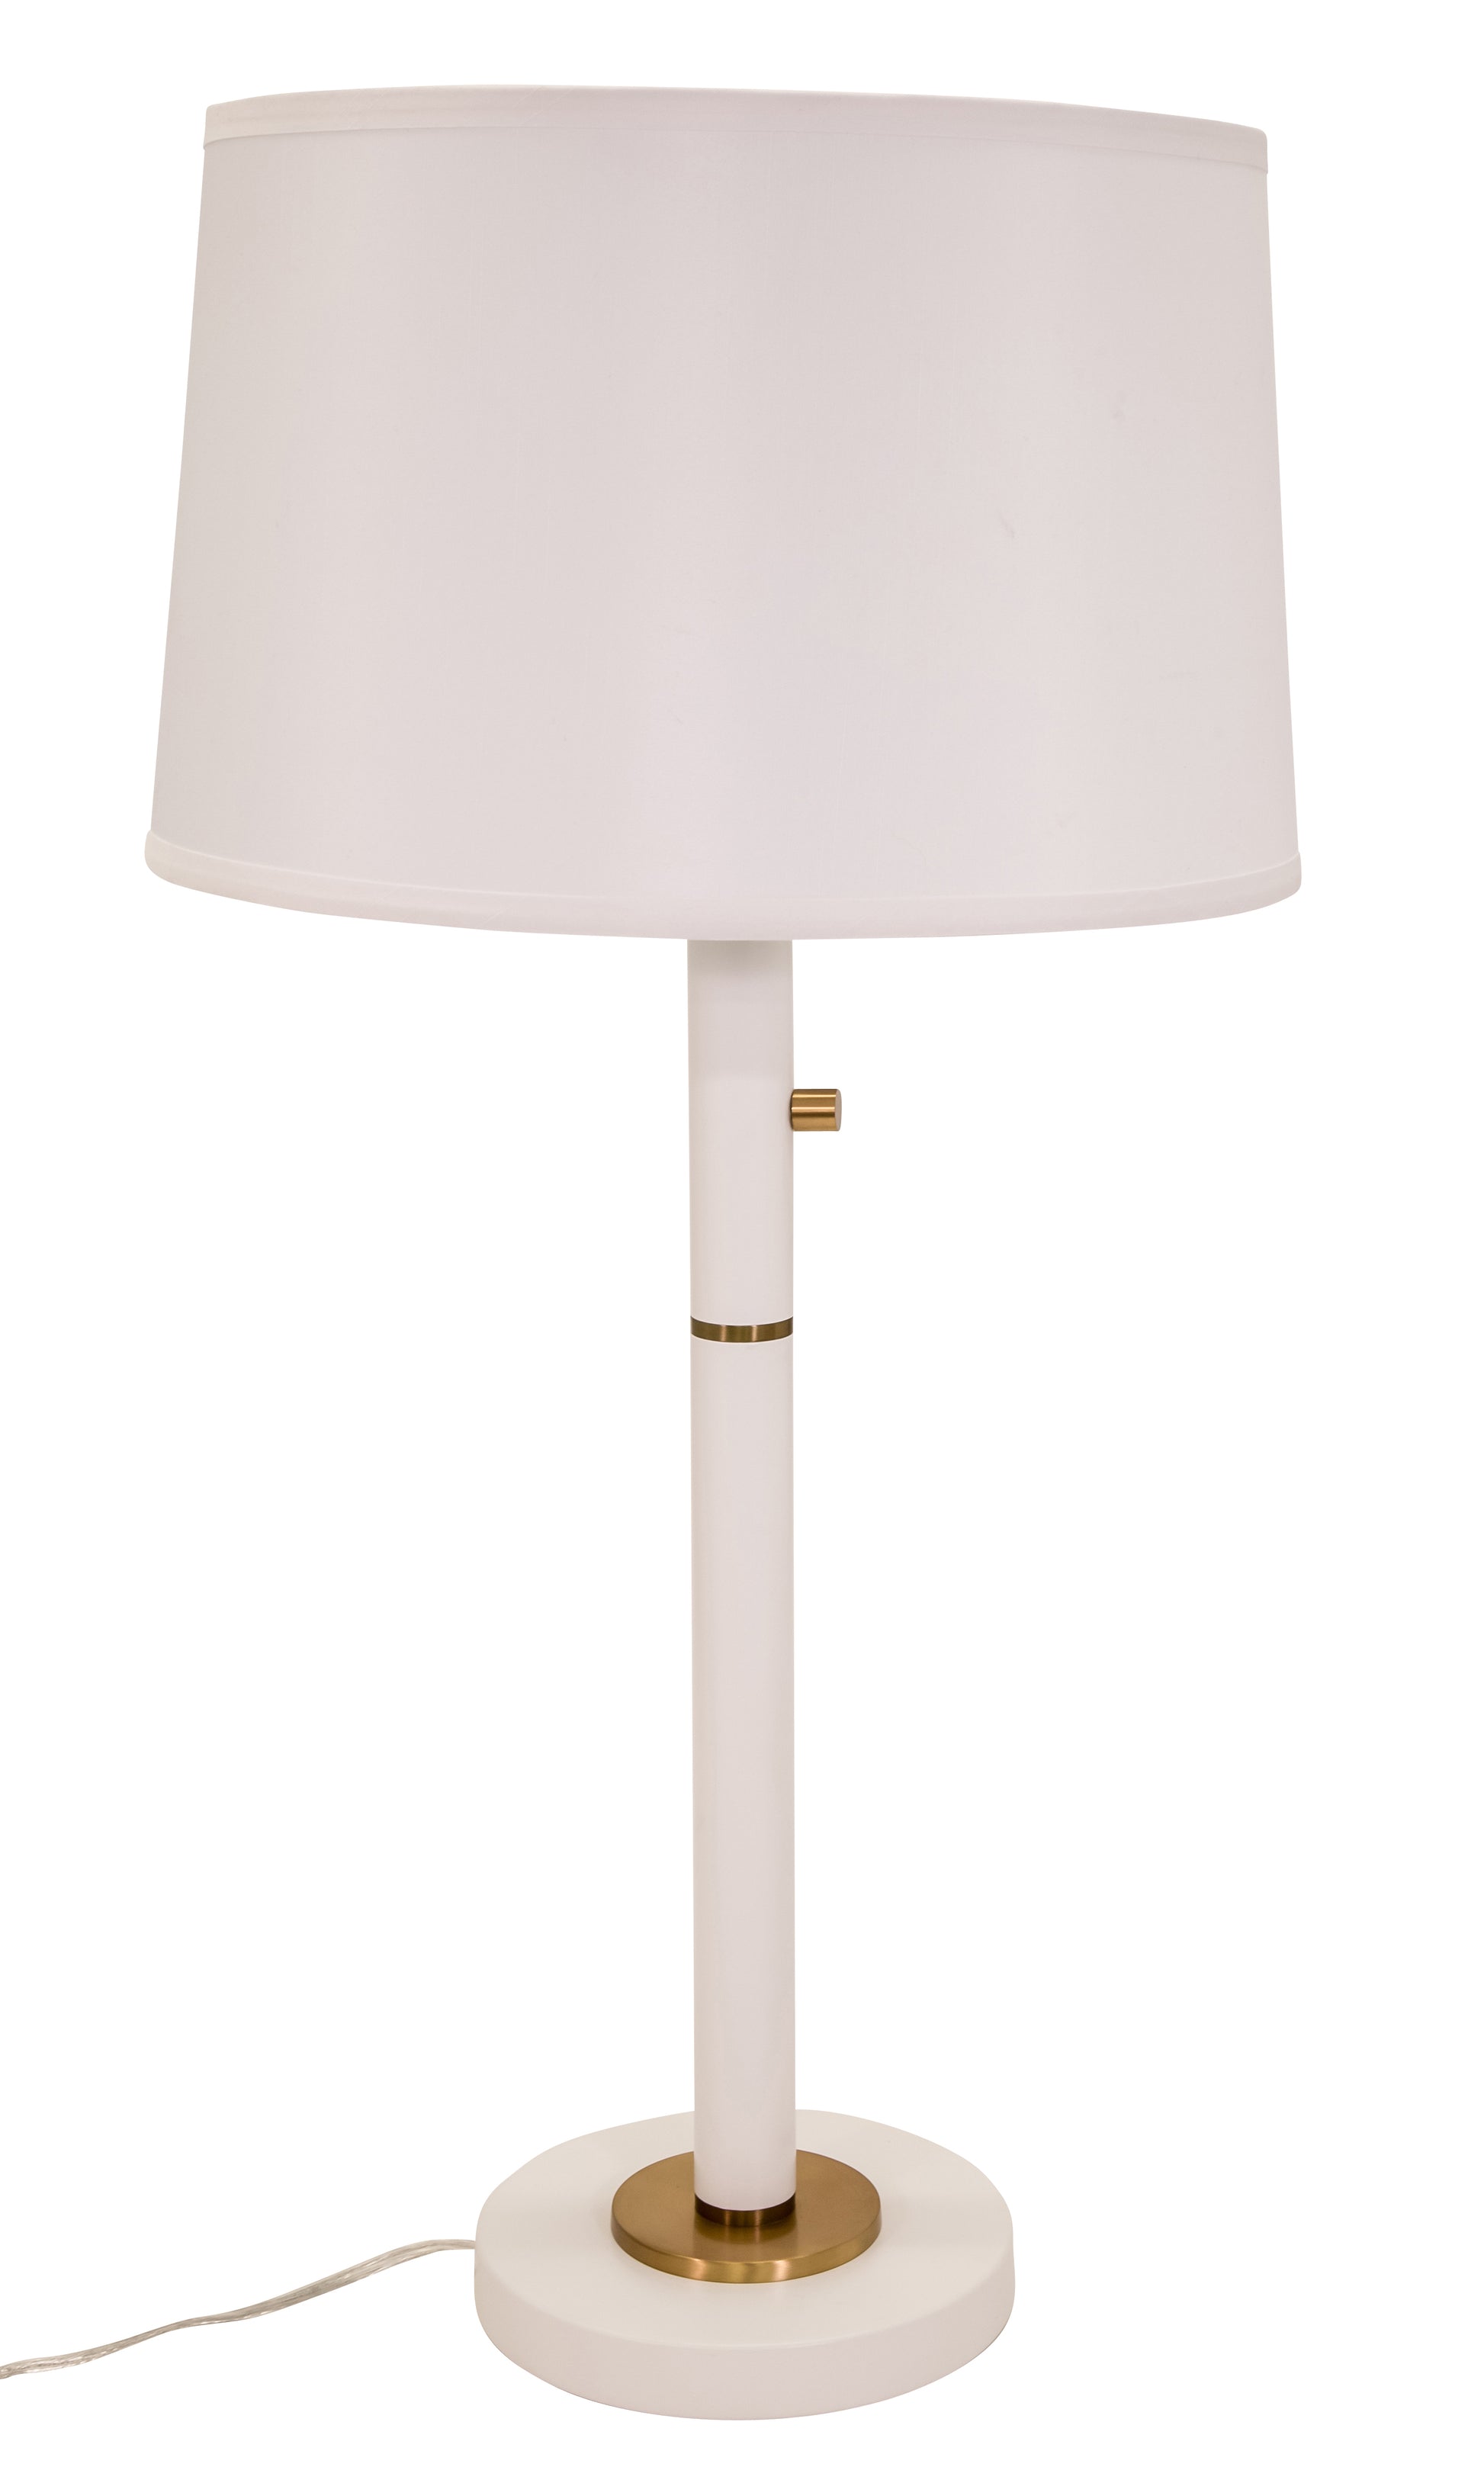 House of Troy Rupert three way table lamp in white with weathered brass accents and USB port RU750-WT